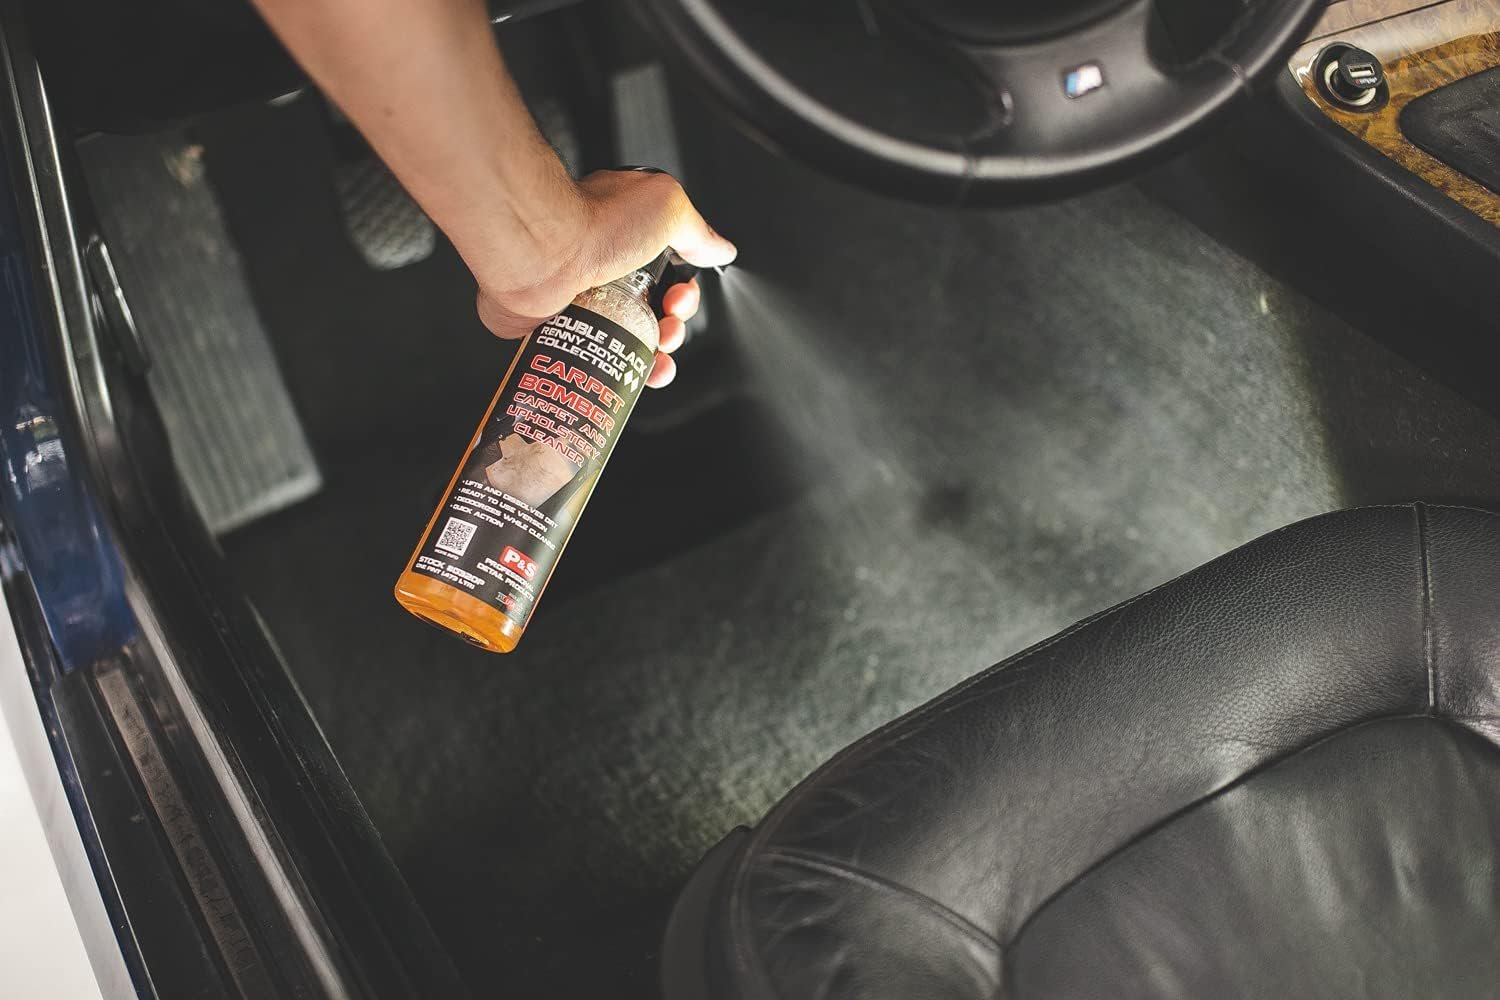 5 Types of Car Upholstery and How to Clean Them